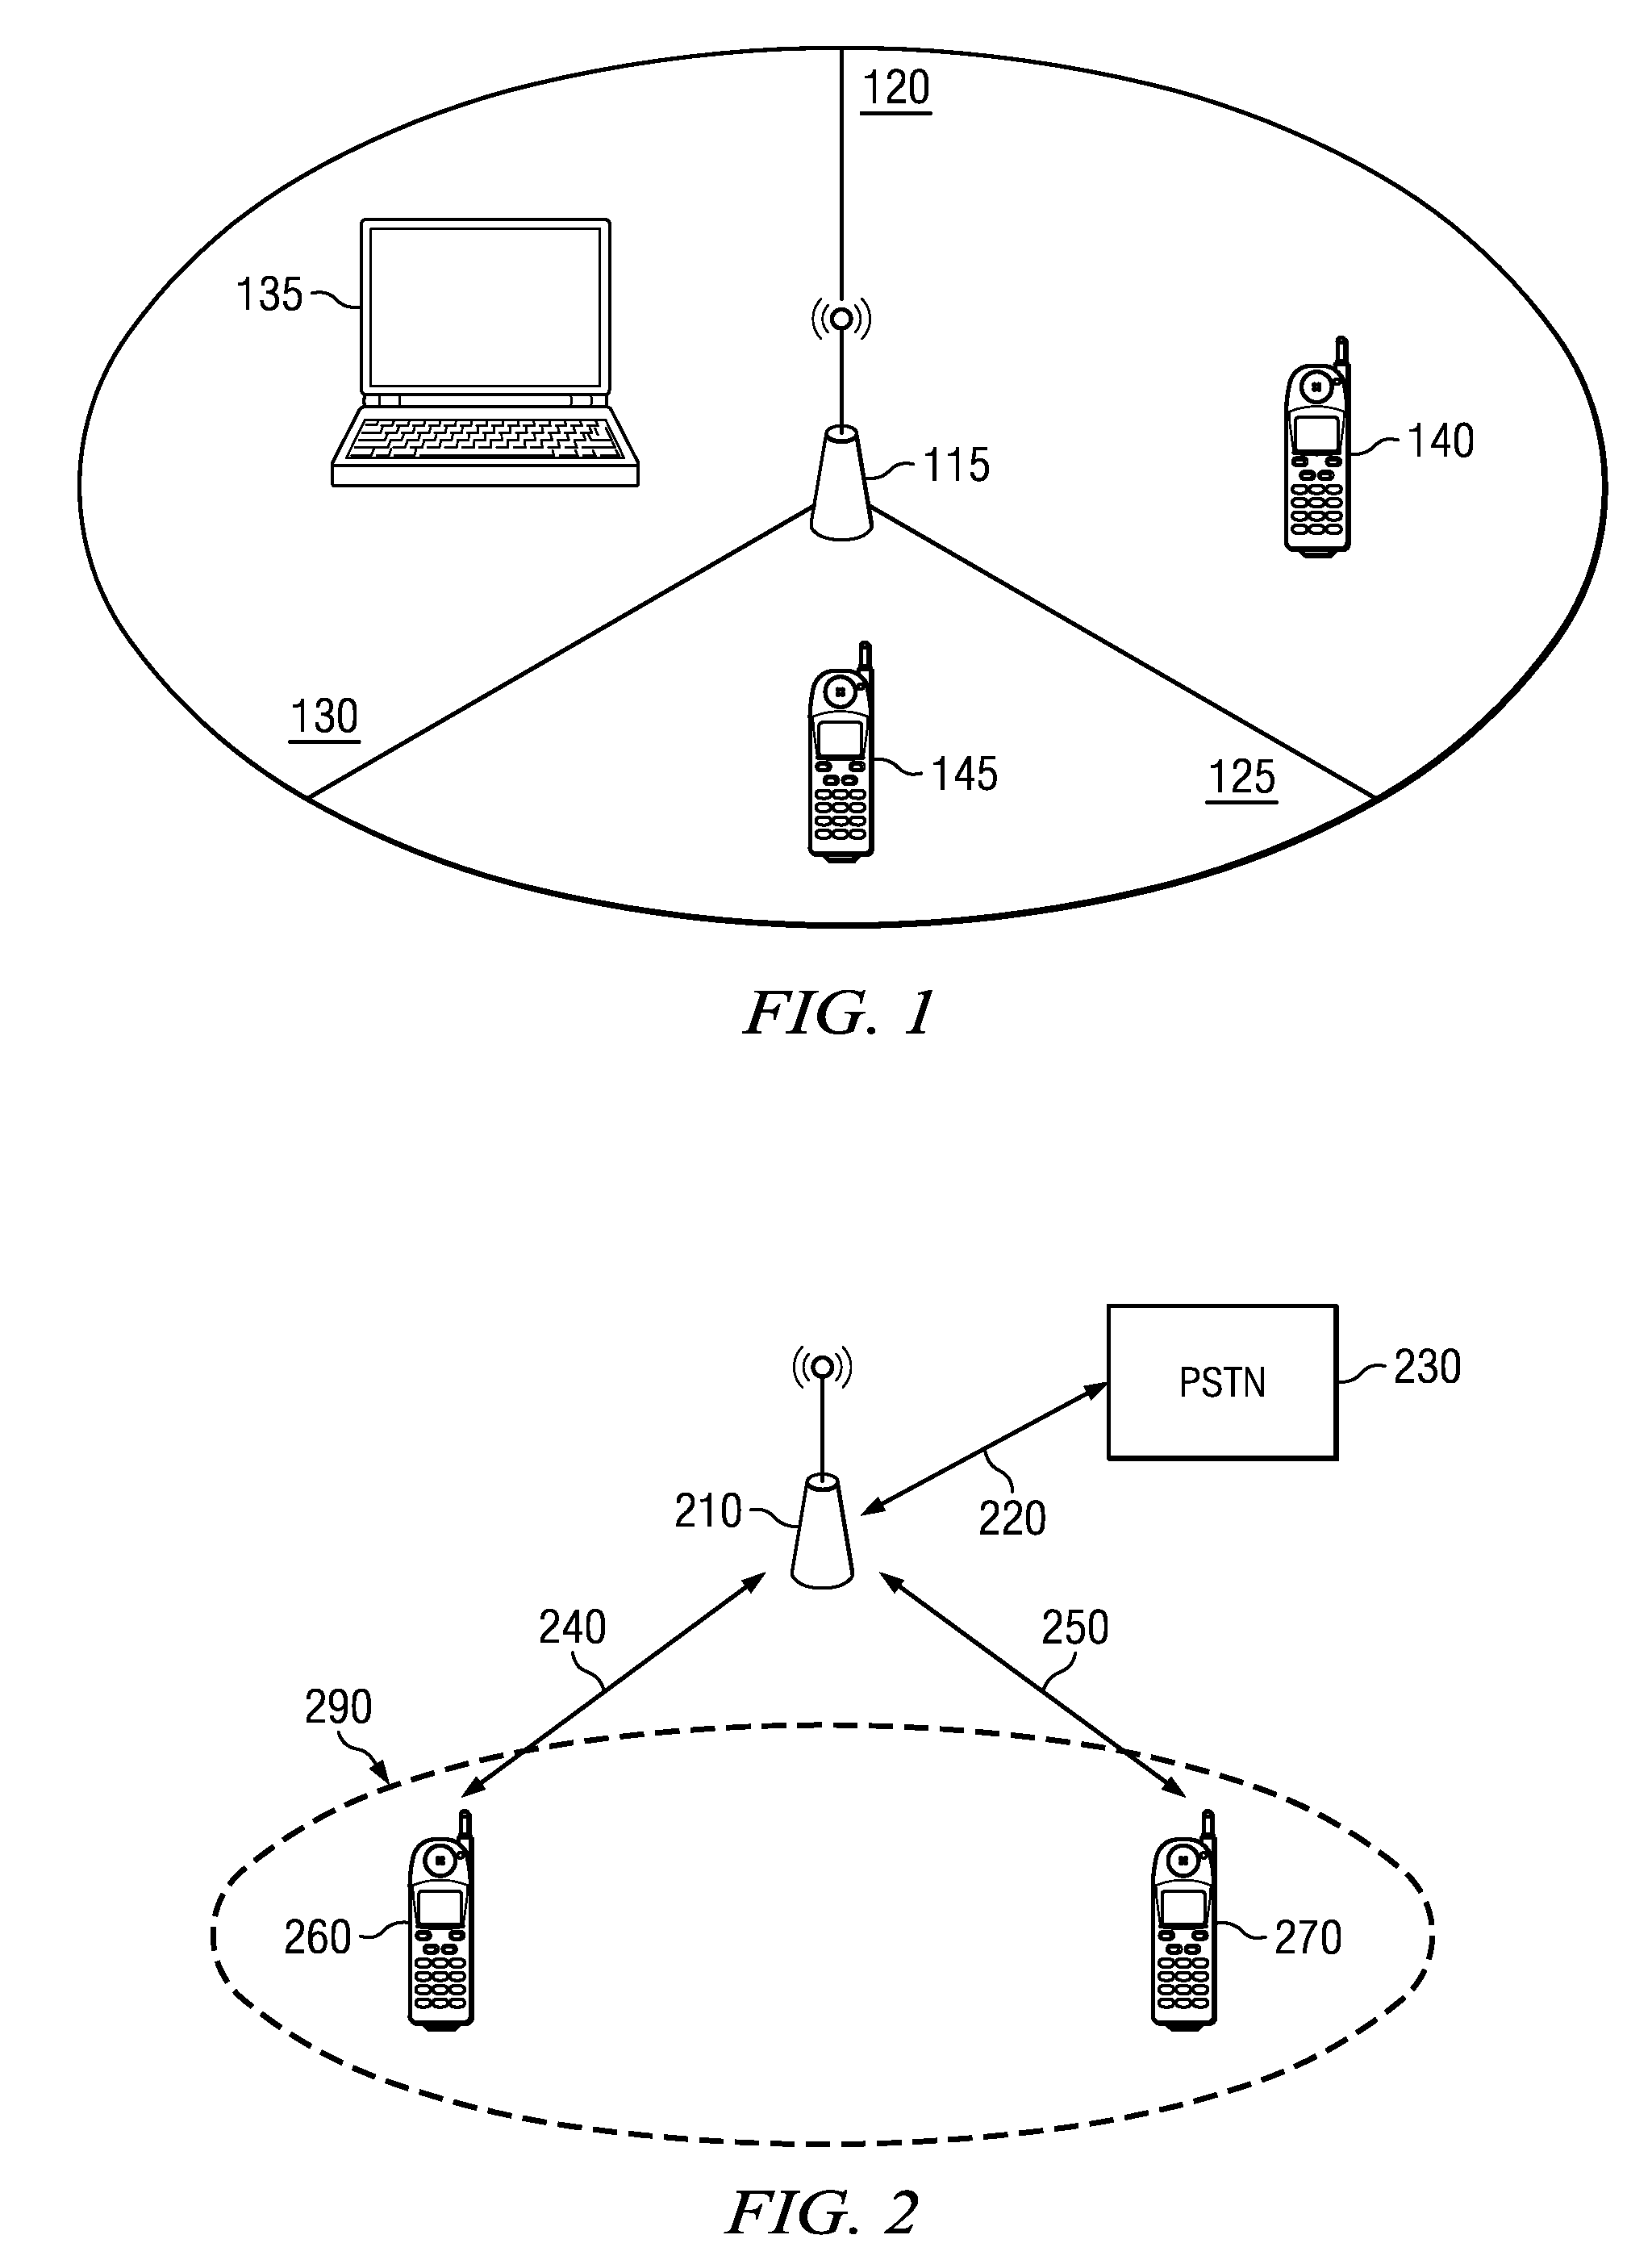 Apparatus and method to allocate communication resources for an aperiodic data packet in a communication system